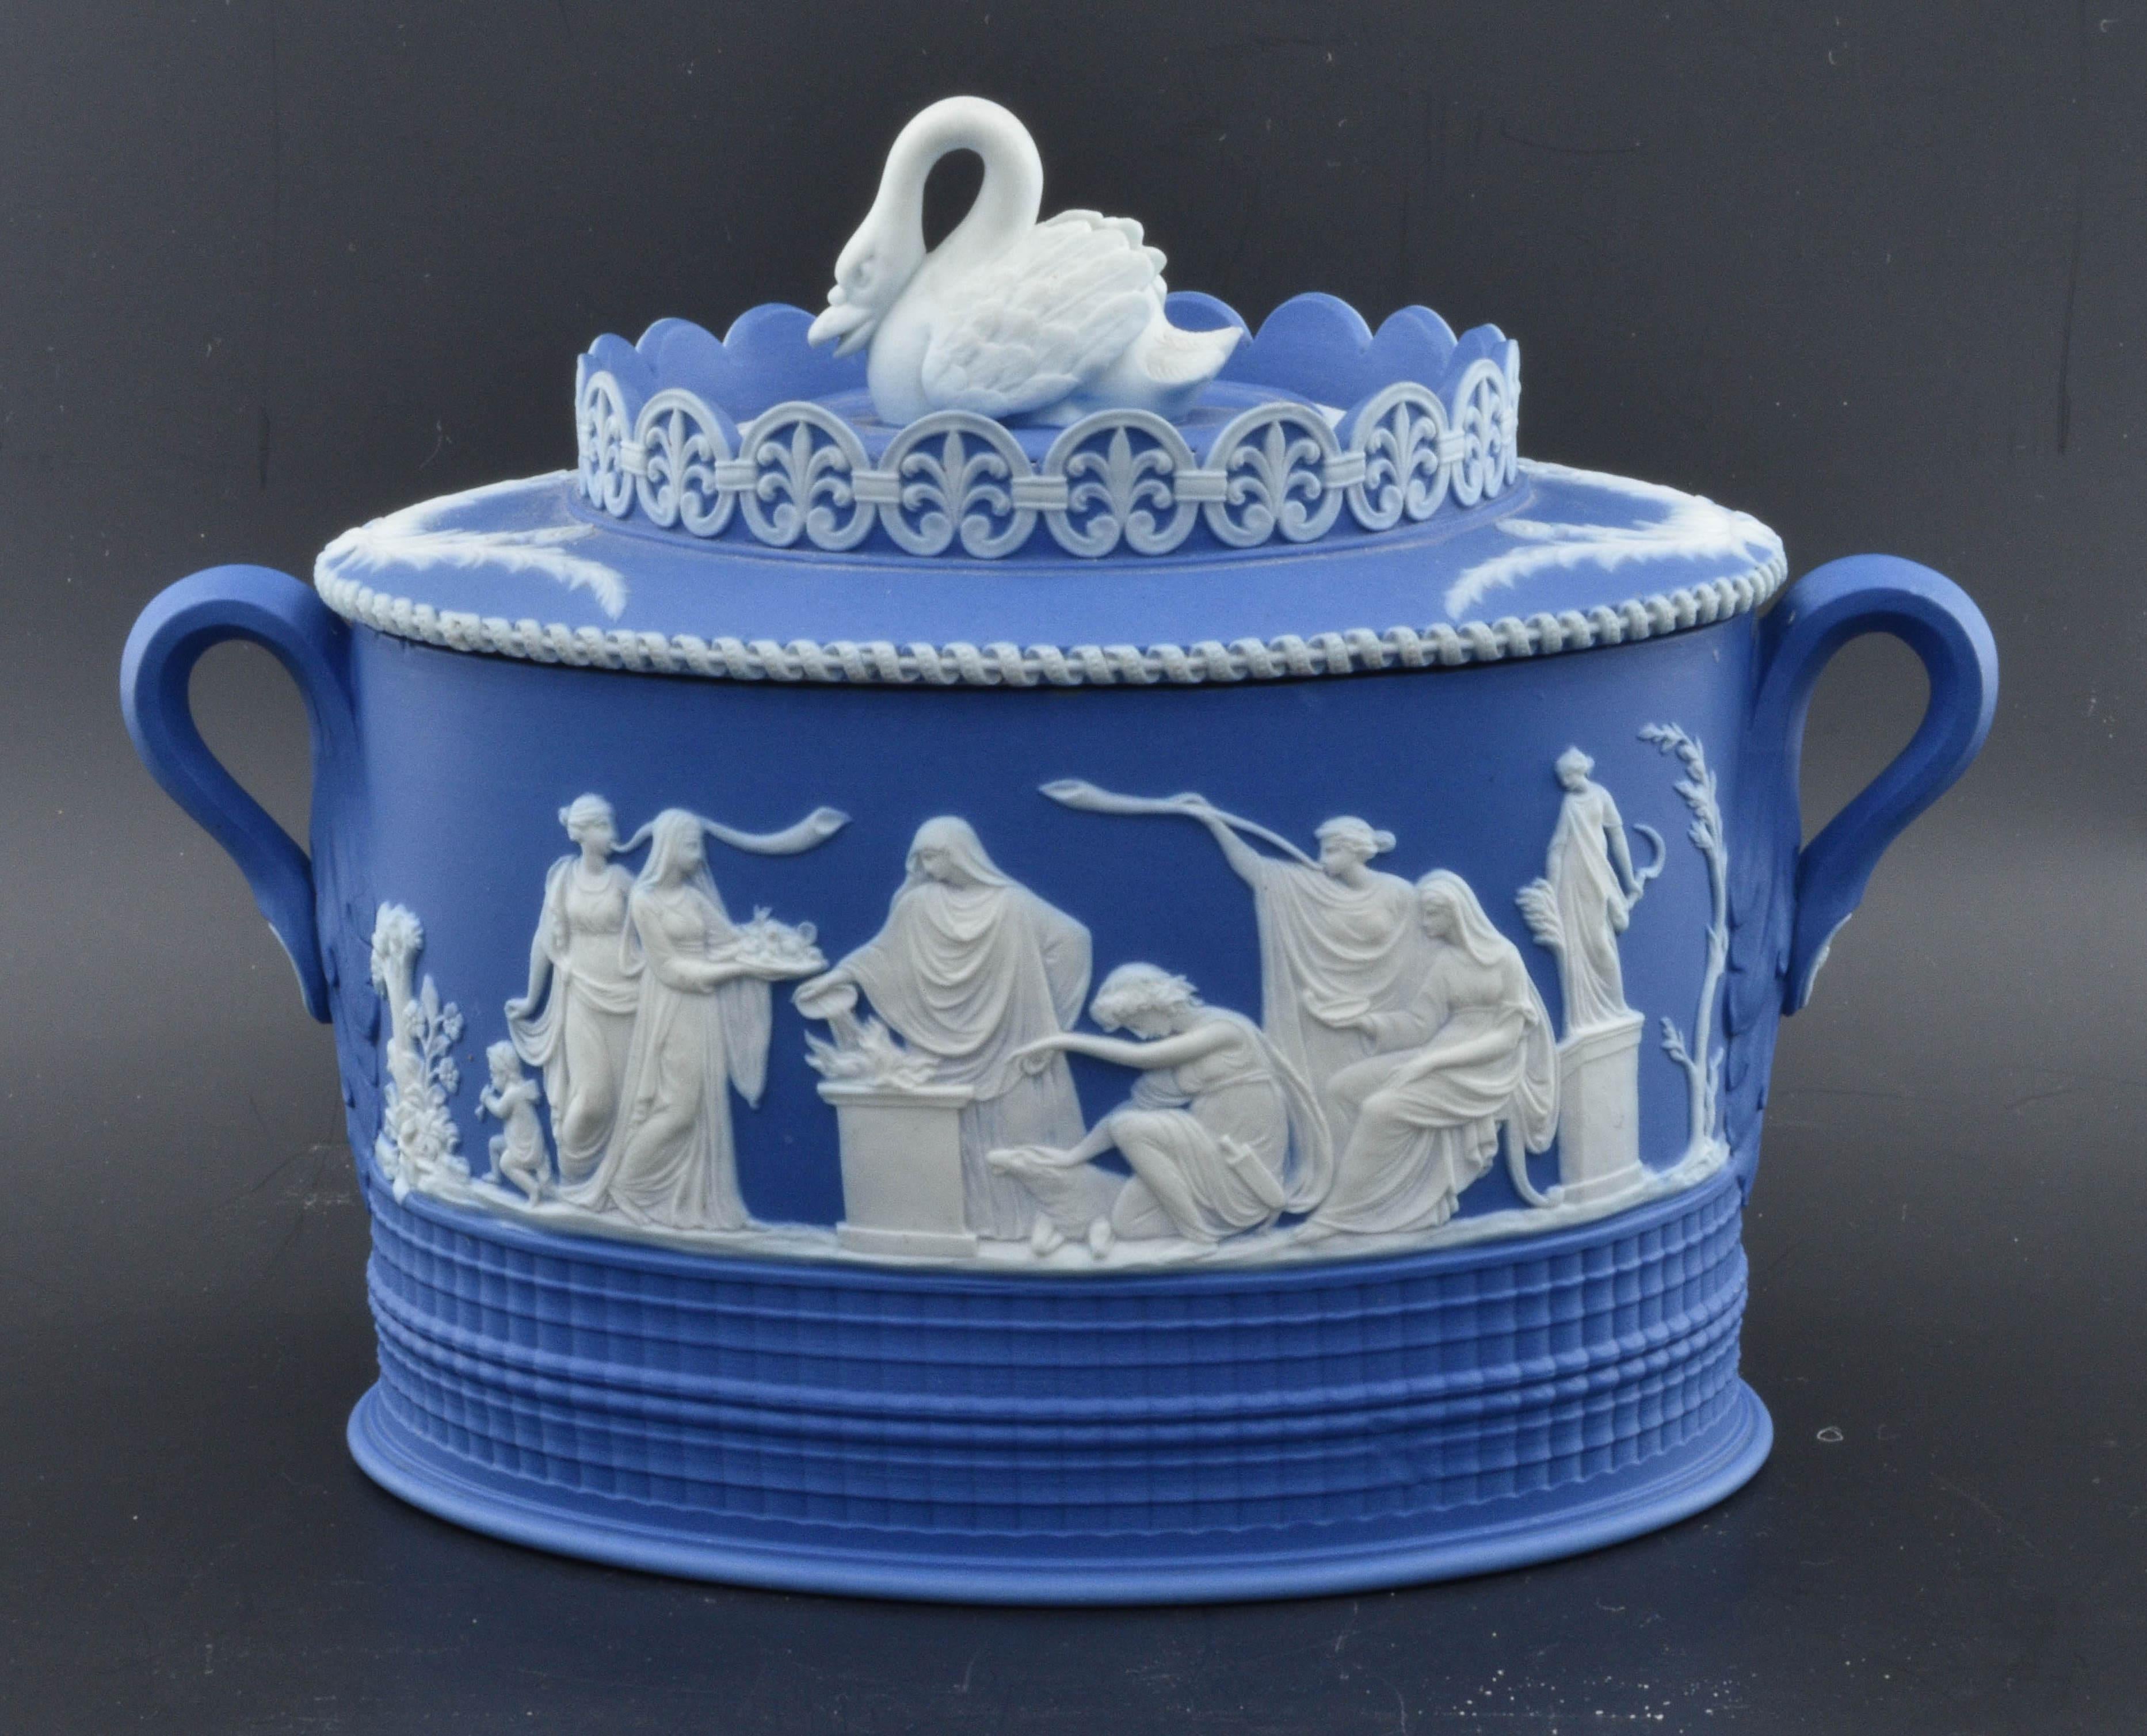 A fabulous oval sugar box, with elaborate applied relief, engine turning, and a swan finial. 

Impressed mark for Adams.

The Adams pottery company was founded by William Adams in the late 18th century. Adams was apprenticed to Josiah Wedgwood,